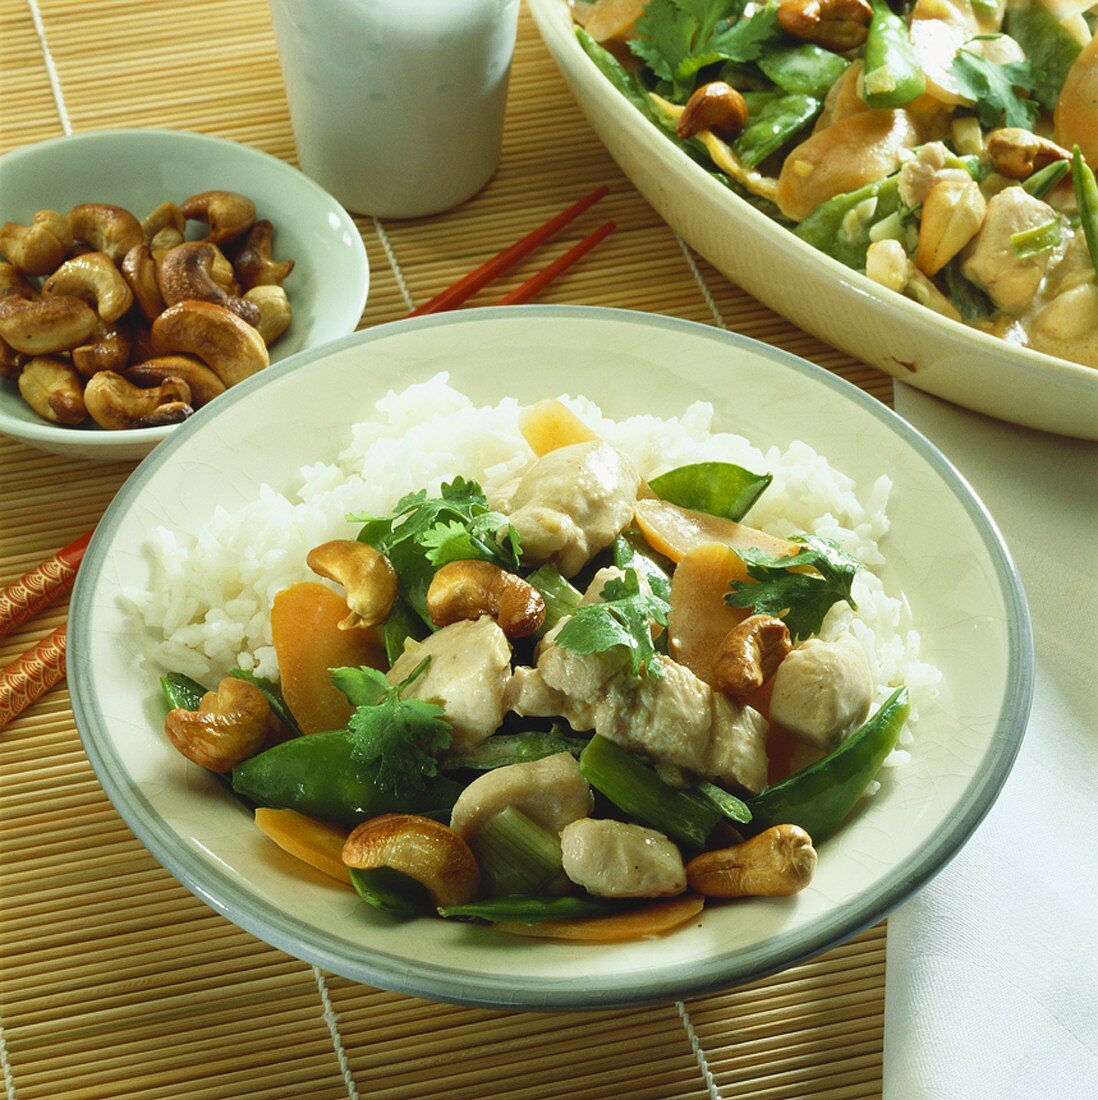 Spicy coconut chicken with vegetables, cashew nuts & rice